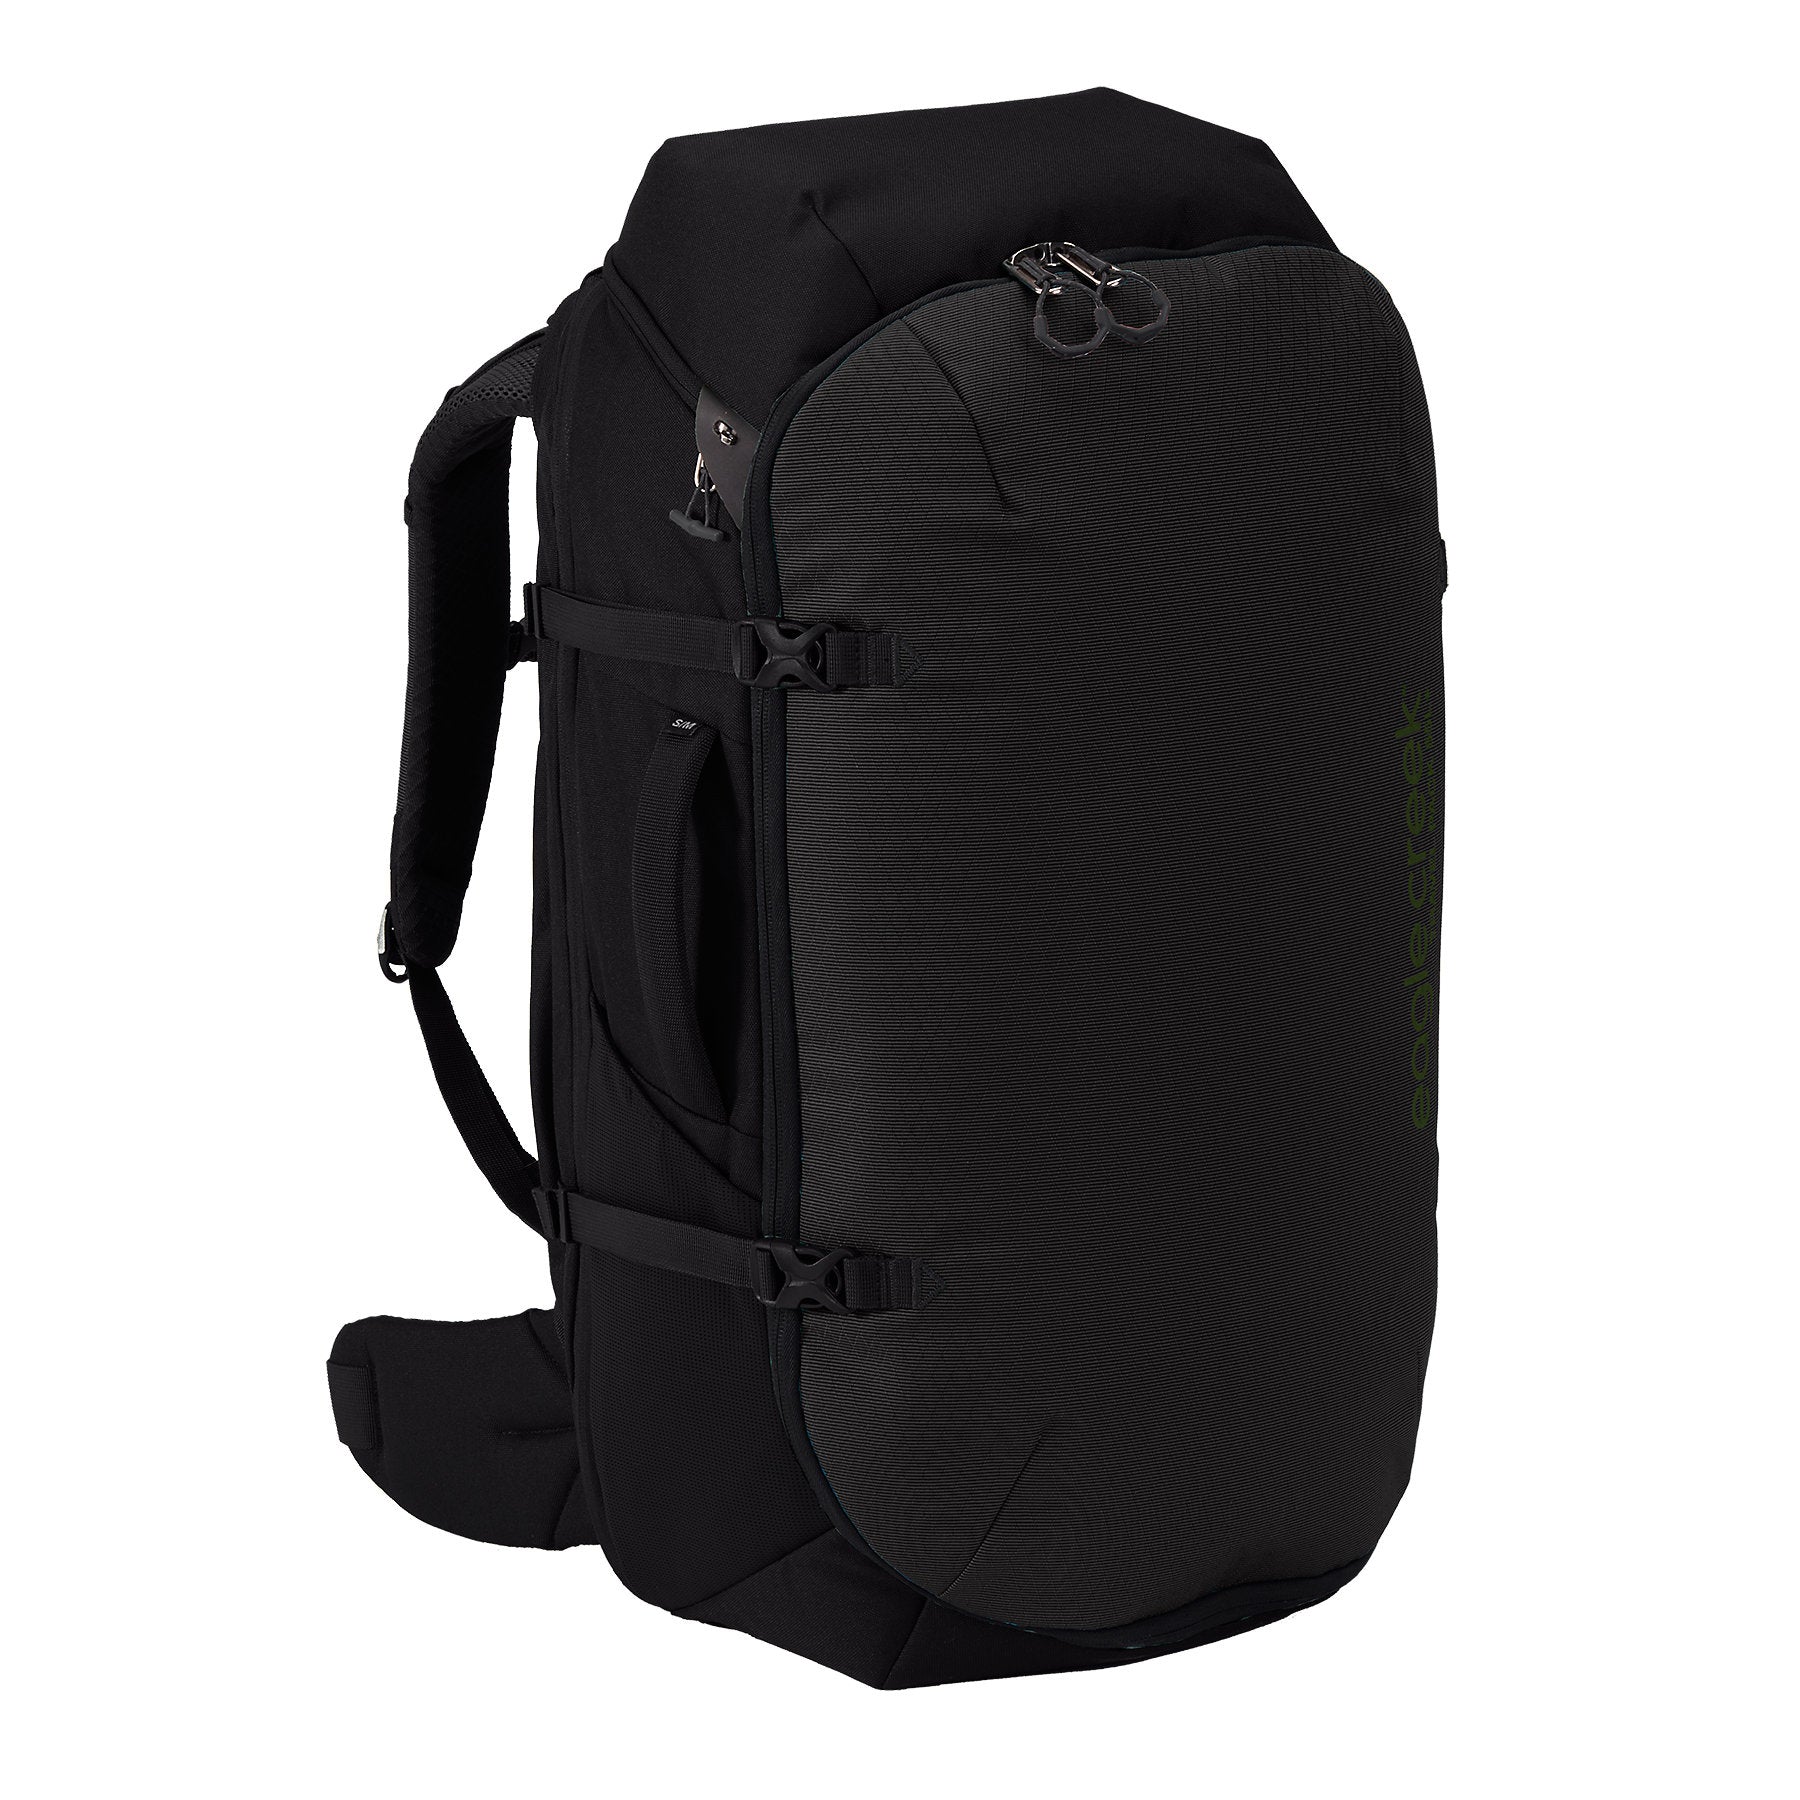 Eagle Creek Gear Review: Transformational luggage – The Denver Post